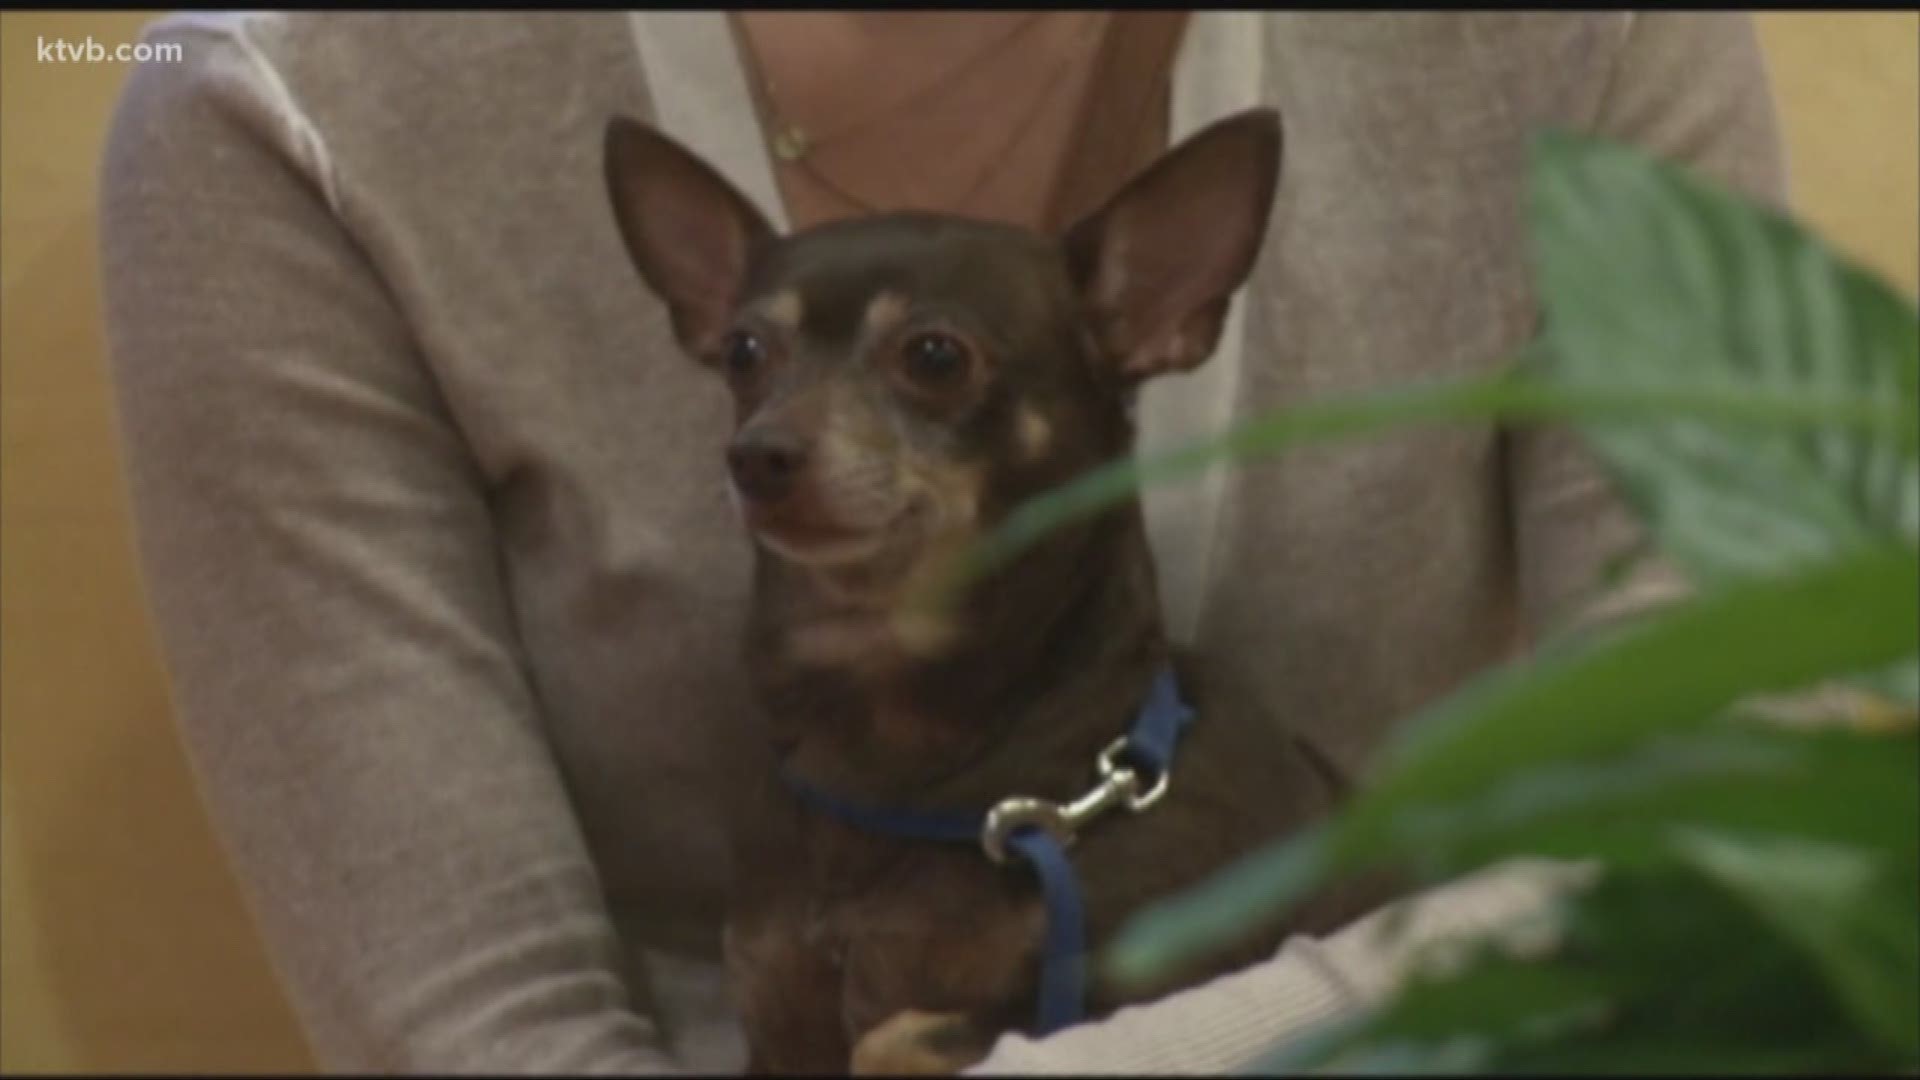 Fireworks can be frightening for some pets. The Idaho Humane Society has some tips to keep your pets calm and safe during the holiday festivities.